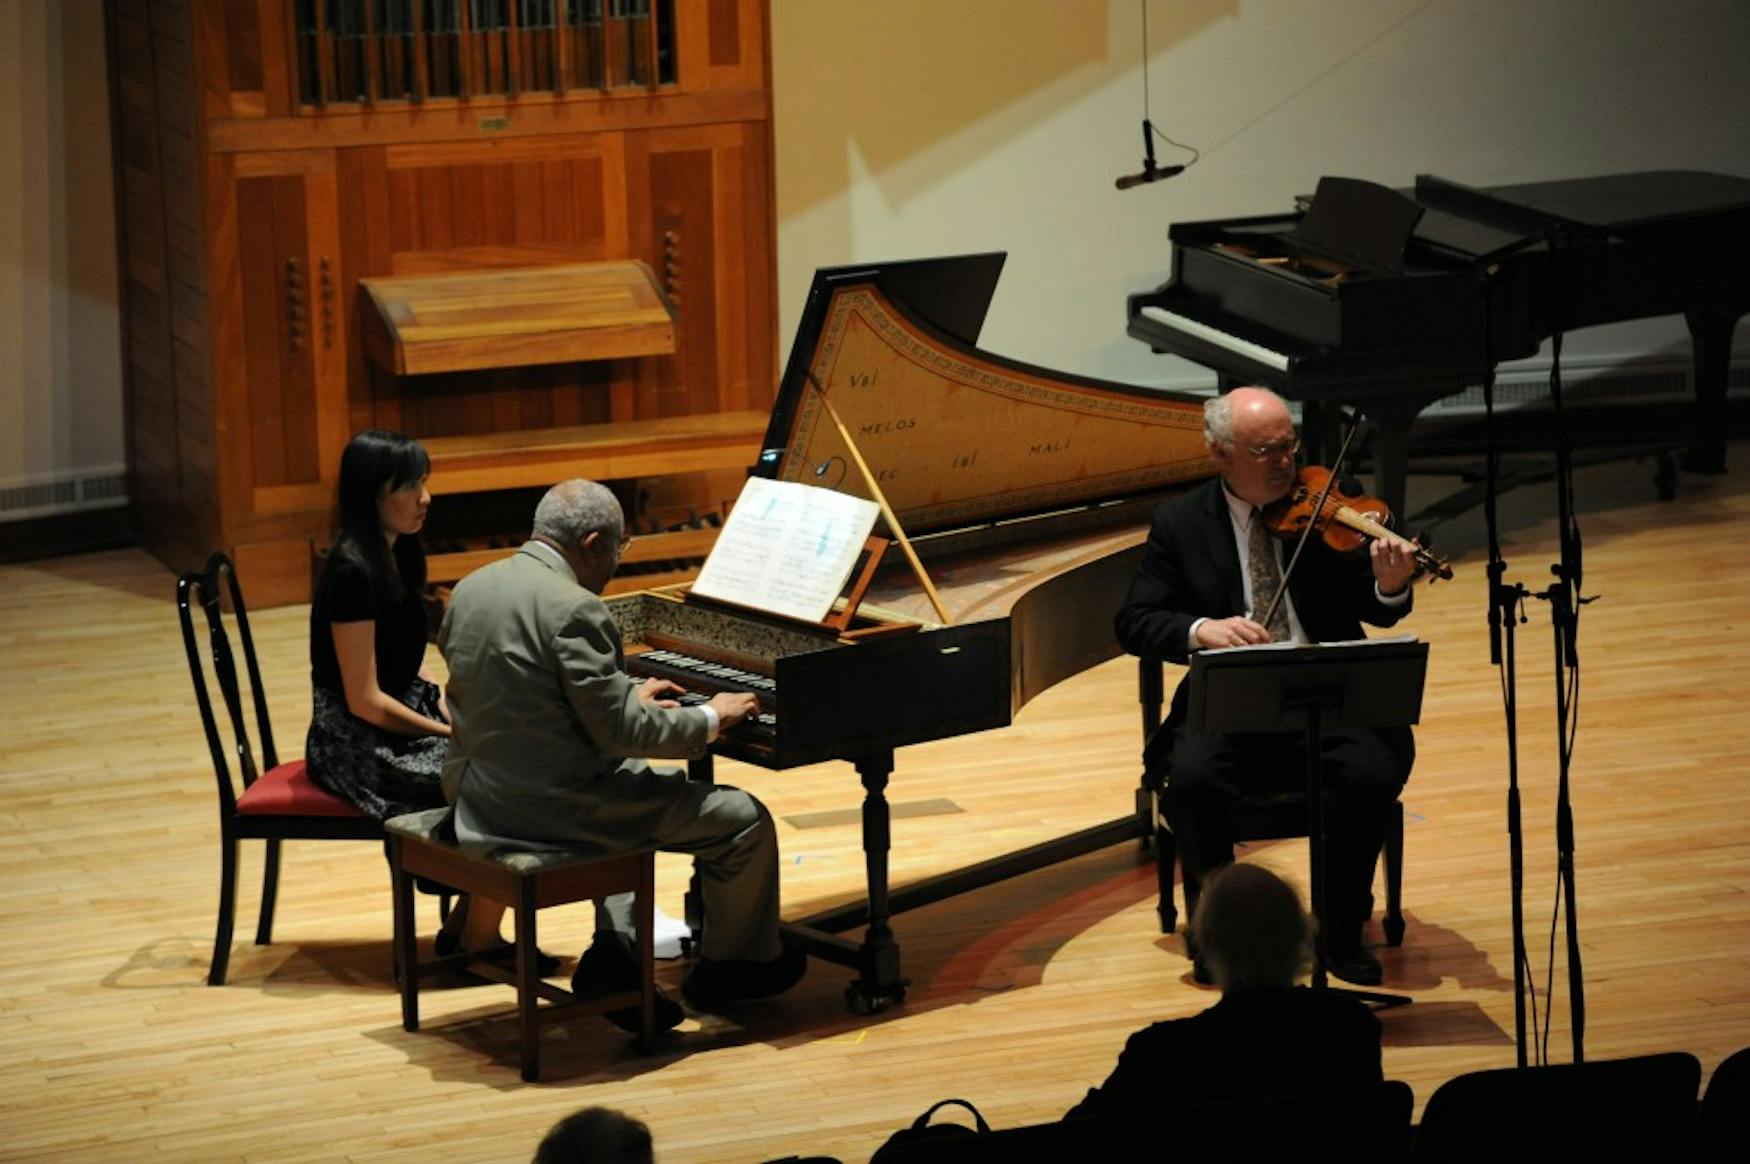 NEXT GENERATION: A concert on Sunday night paid tribute to Erwin Bodky, the first music professor at the University. Pictured below are James Nickleson (left) on the harpsichord and Prof. Daniel Stepner (MUS) (right) on the violin.